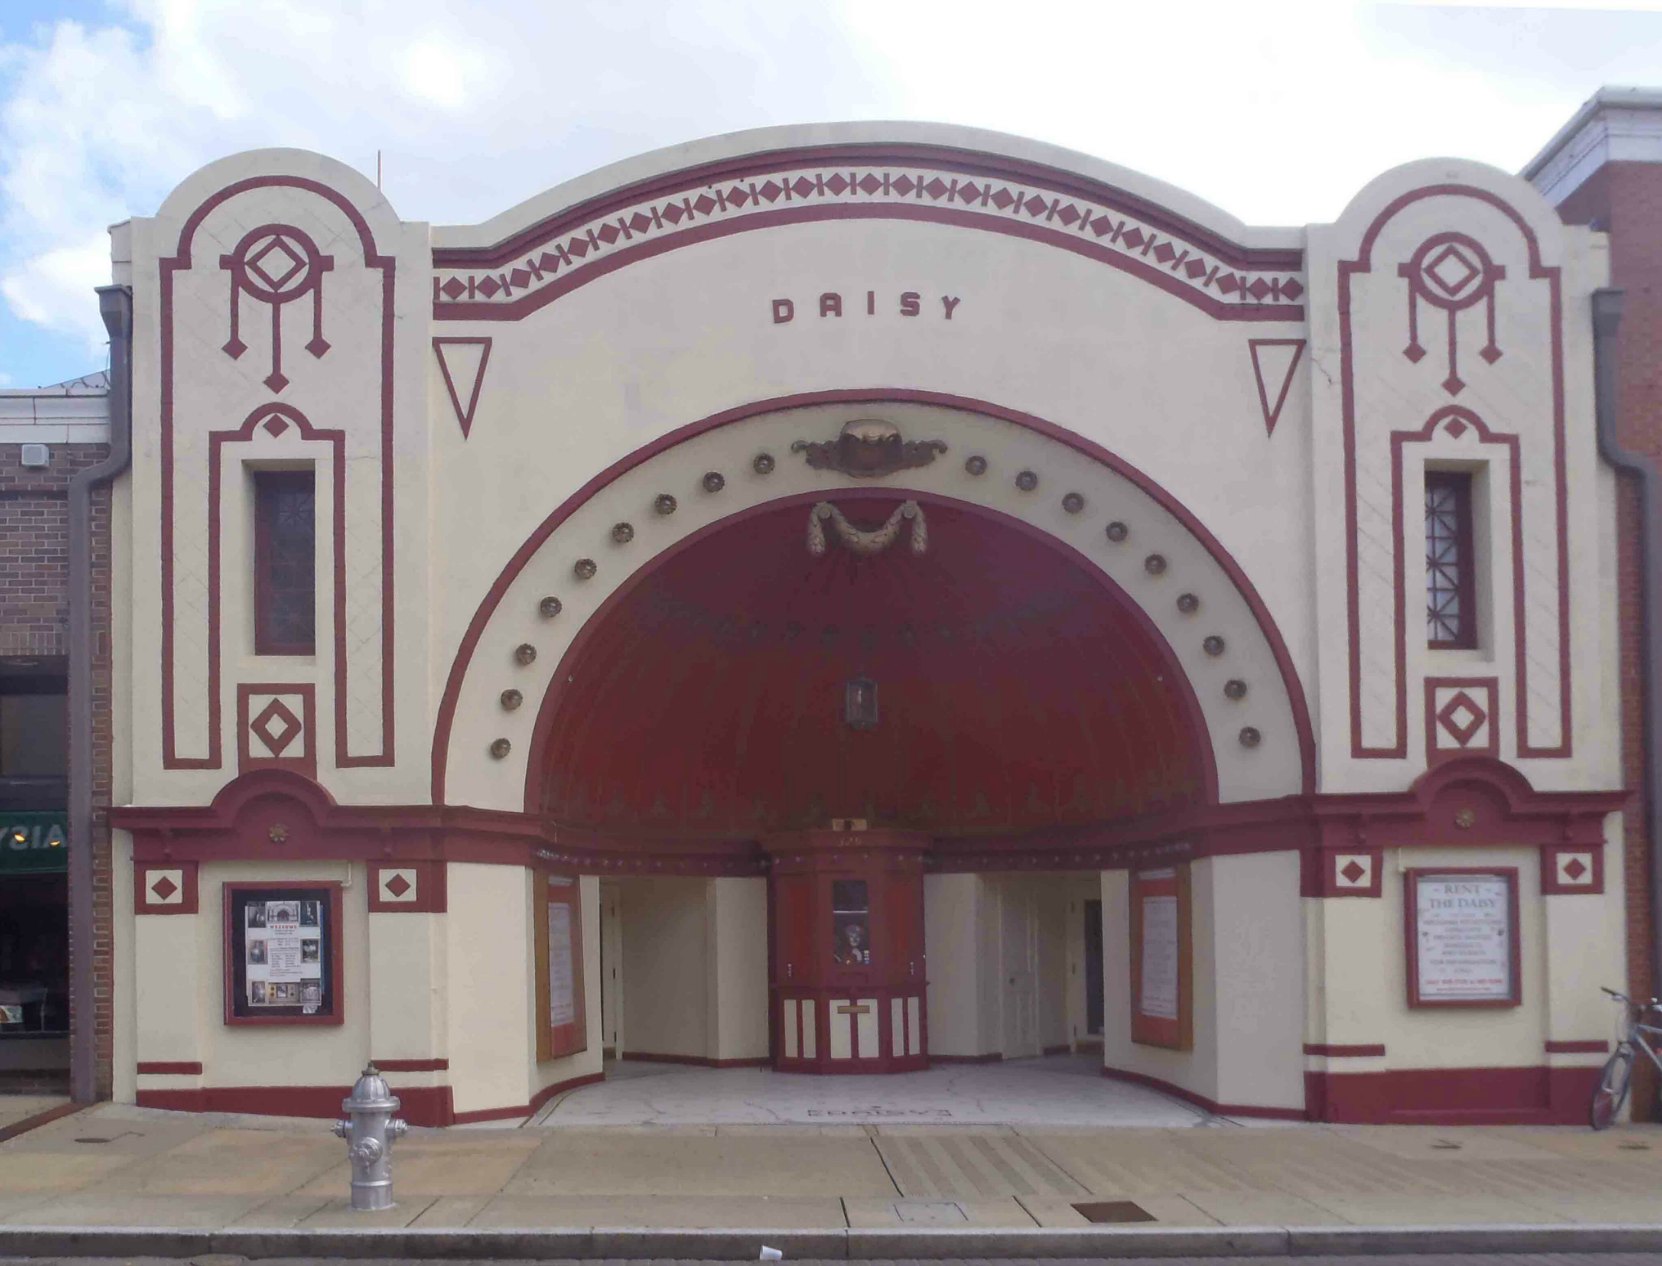 The Daisy Theatre, 329 Beale Street, Memphis, Tennessee